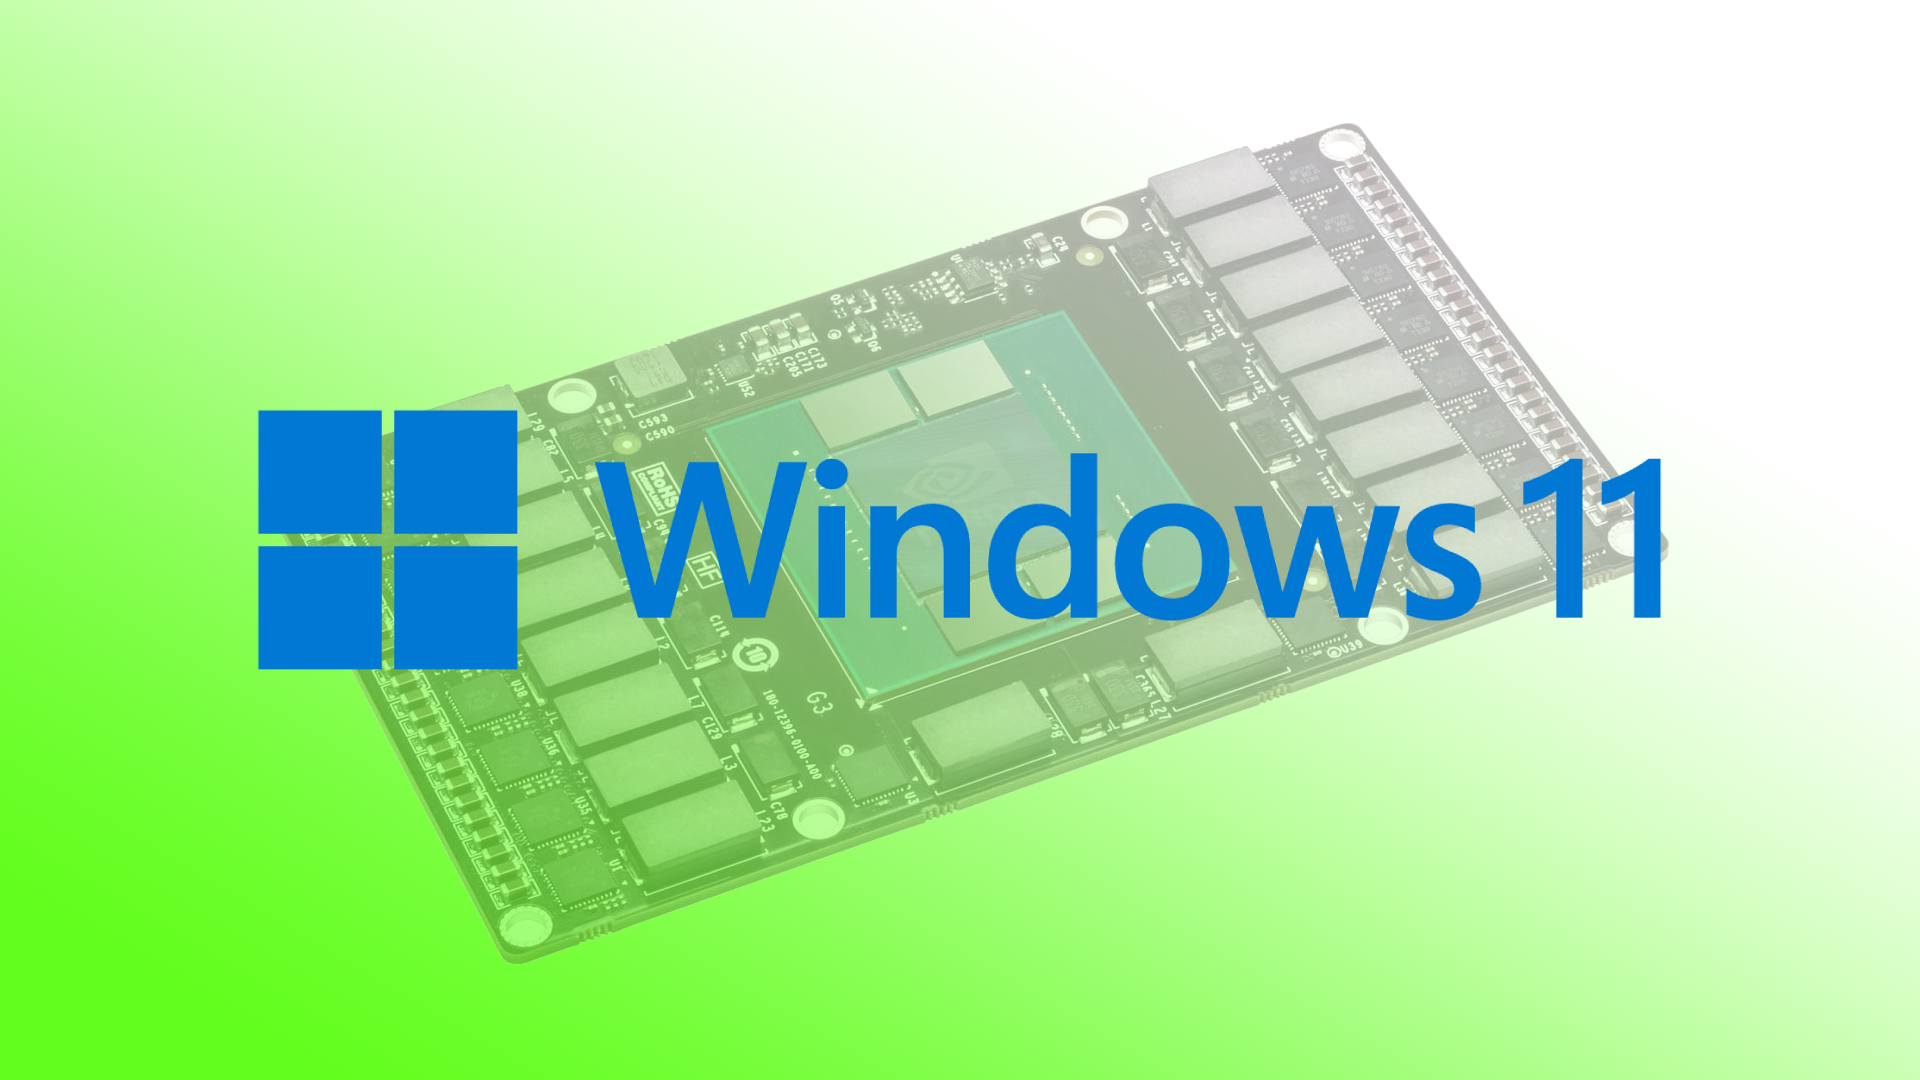 How to check VRAM usage in Windows 11